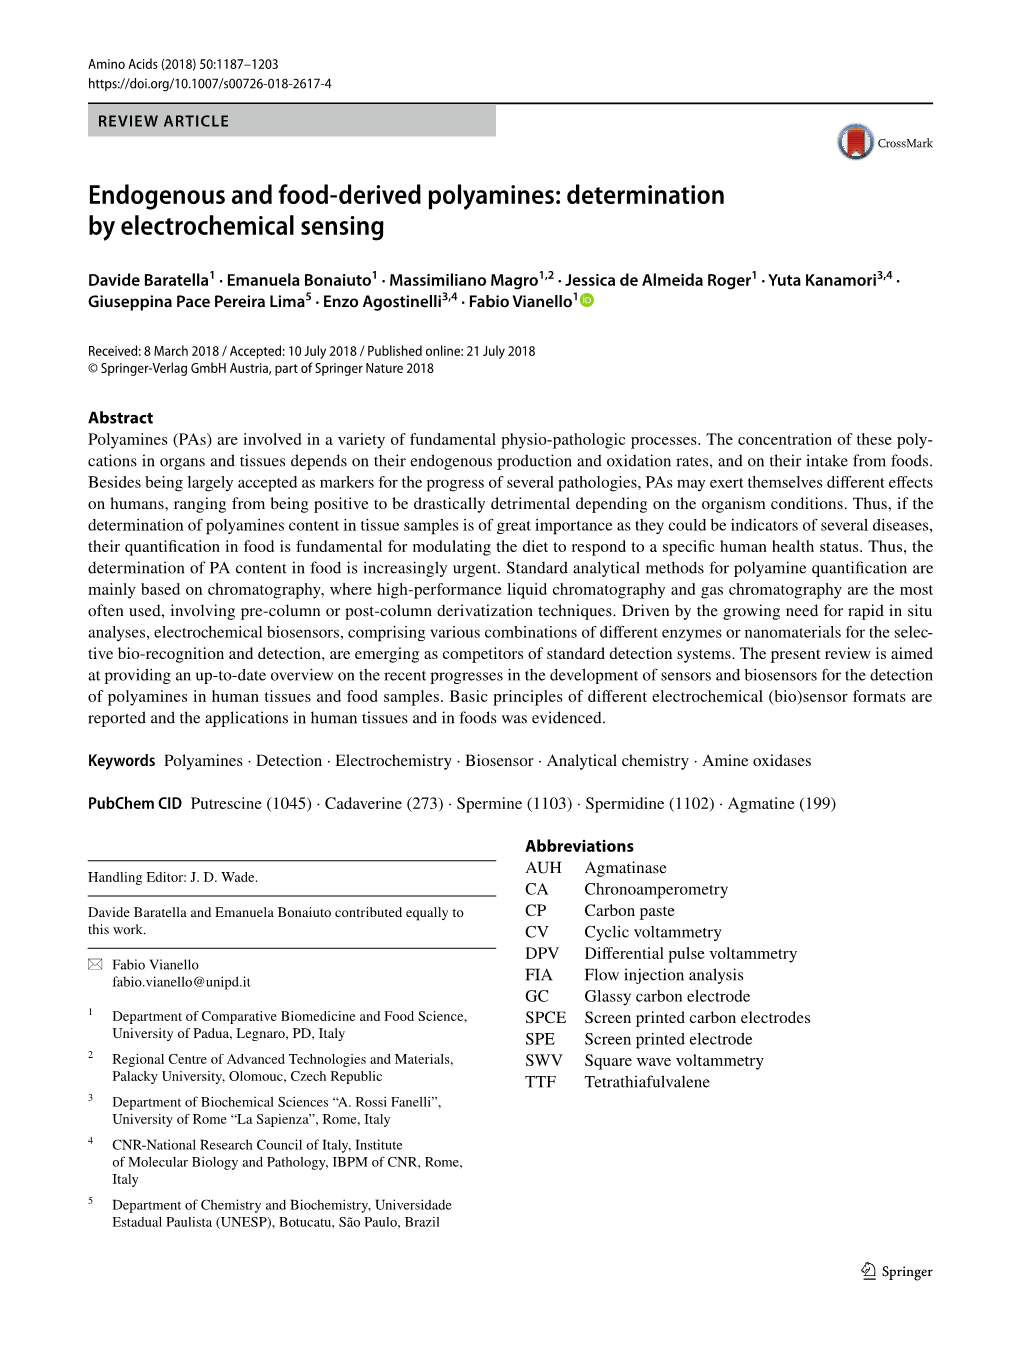 Endogenous and Food-Derived Polyamines: Determination By